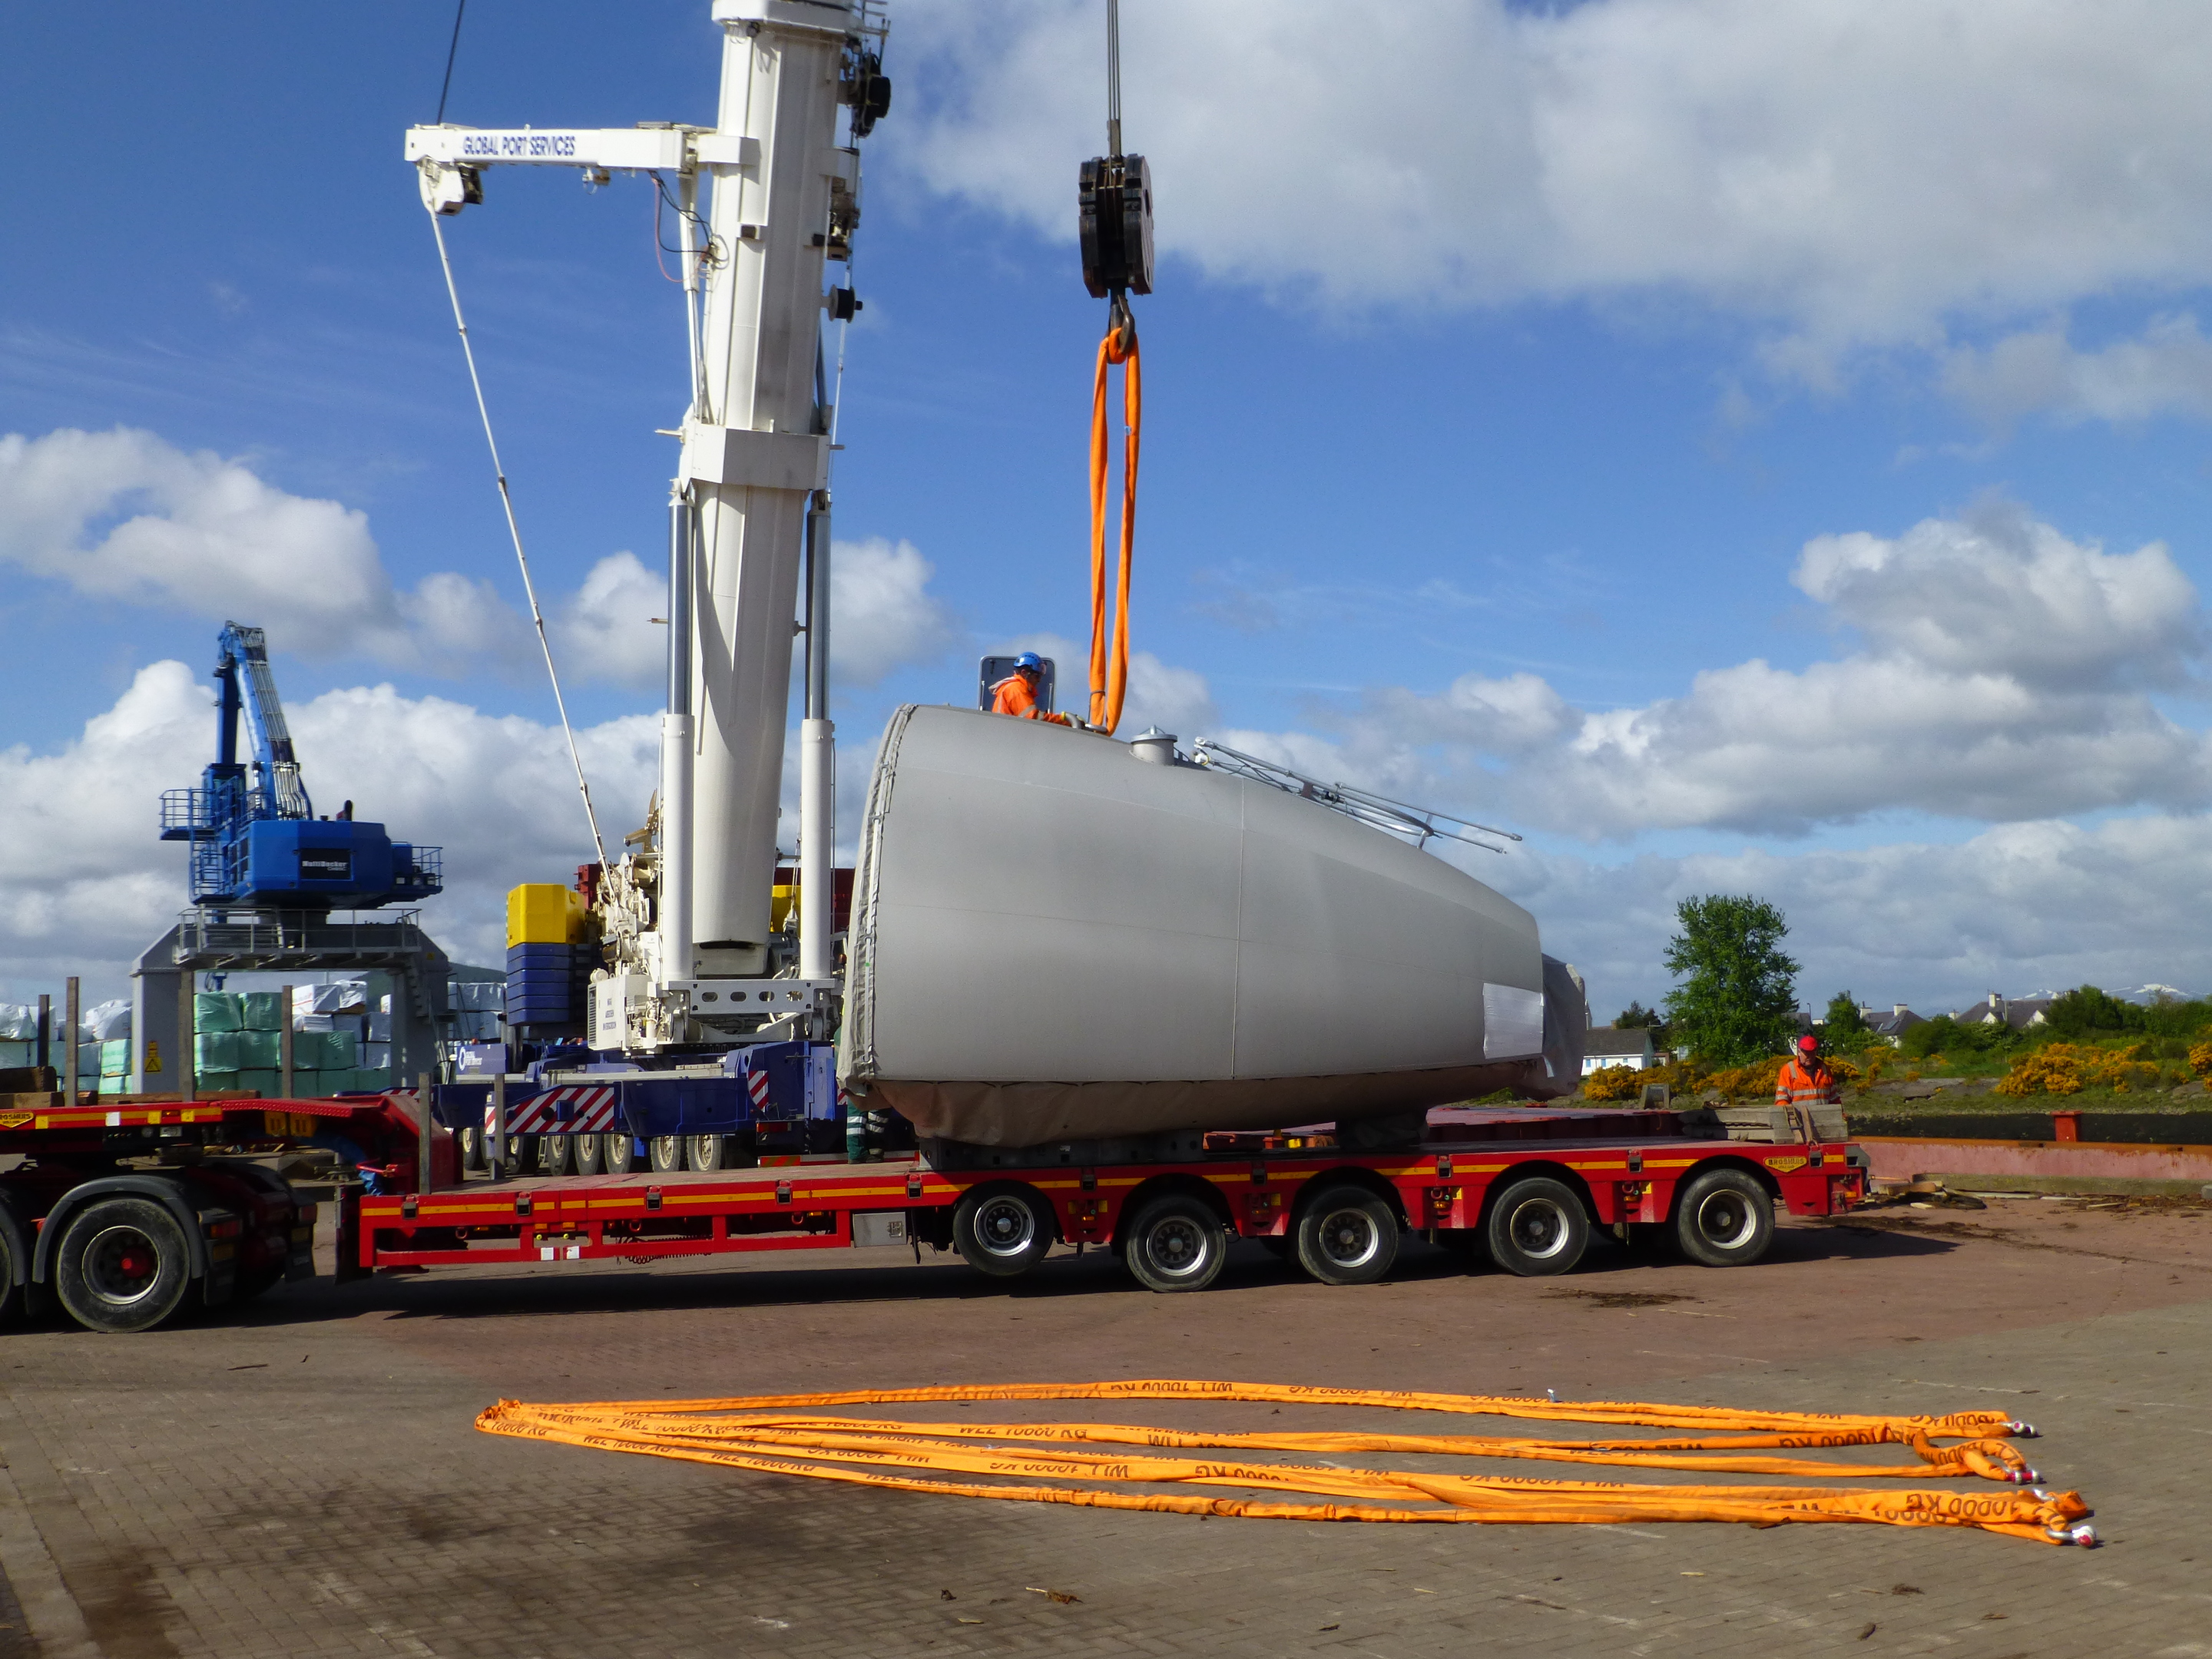 Windfarm parts arrive at the Port of Inverness